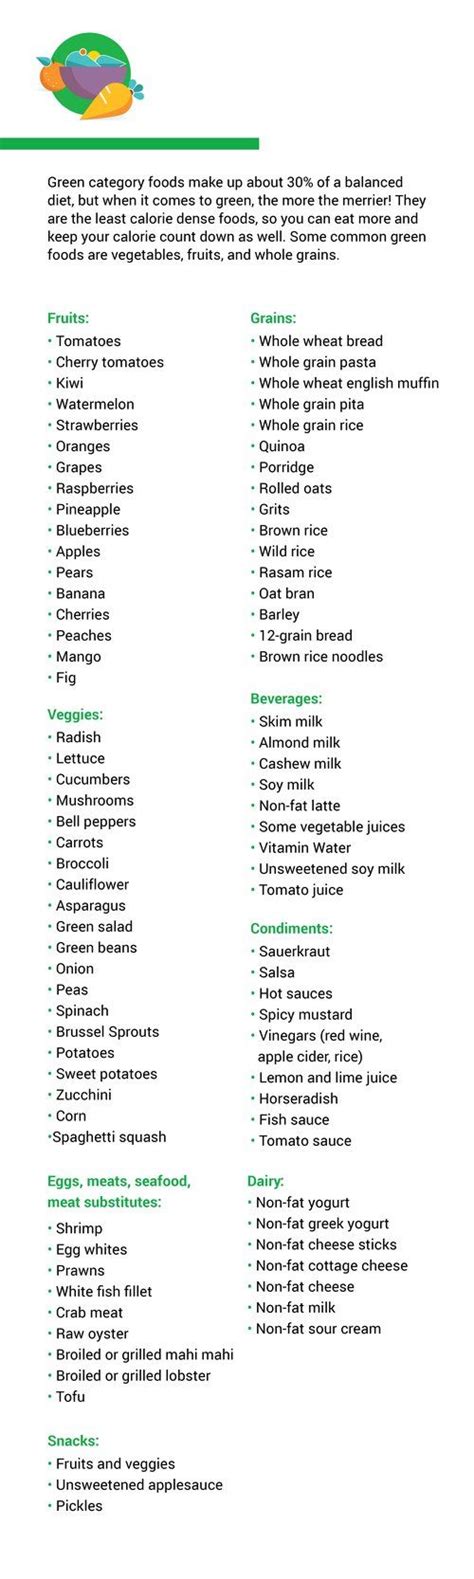 Little changes truly add up, and sustainable progress is inevitably going to take time. Noom Green Food List | Greens recipe, Food lists, Healthy ...